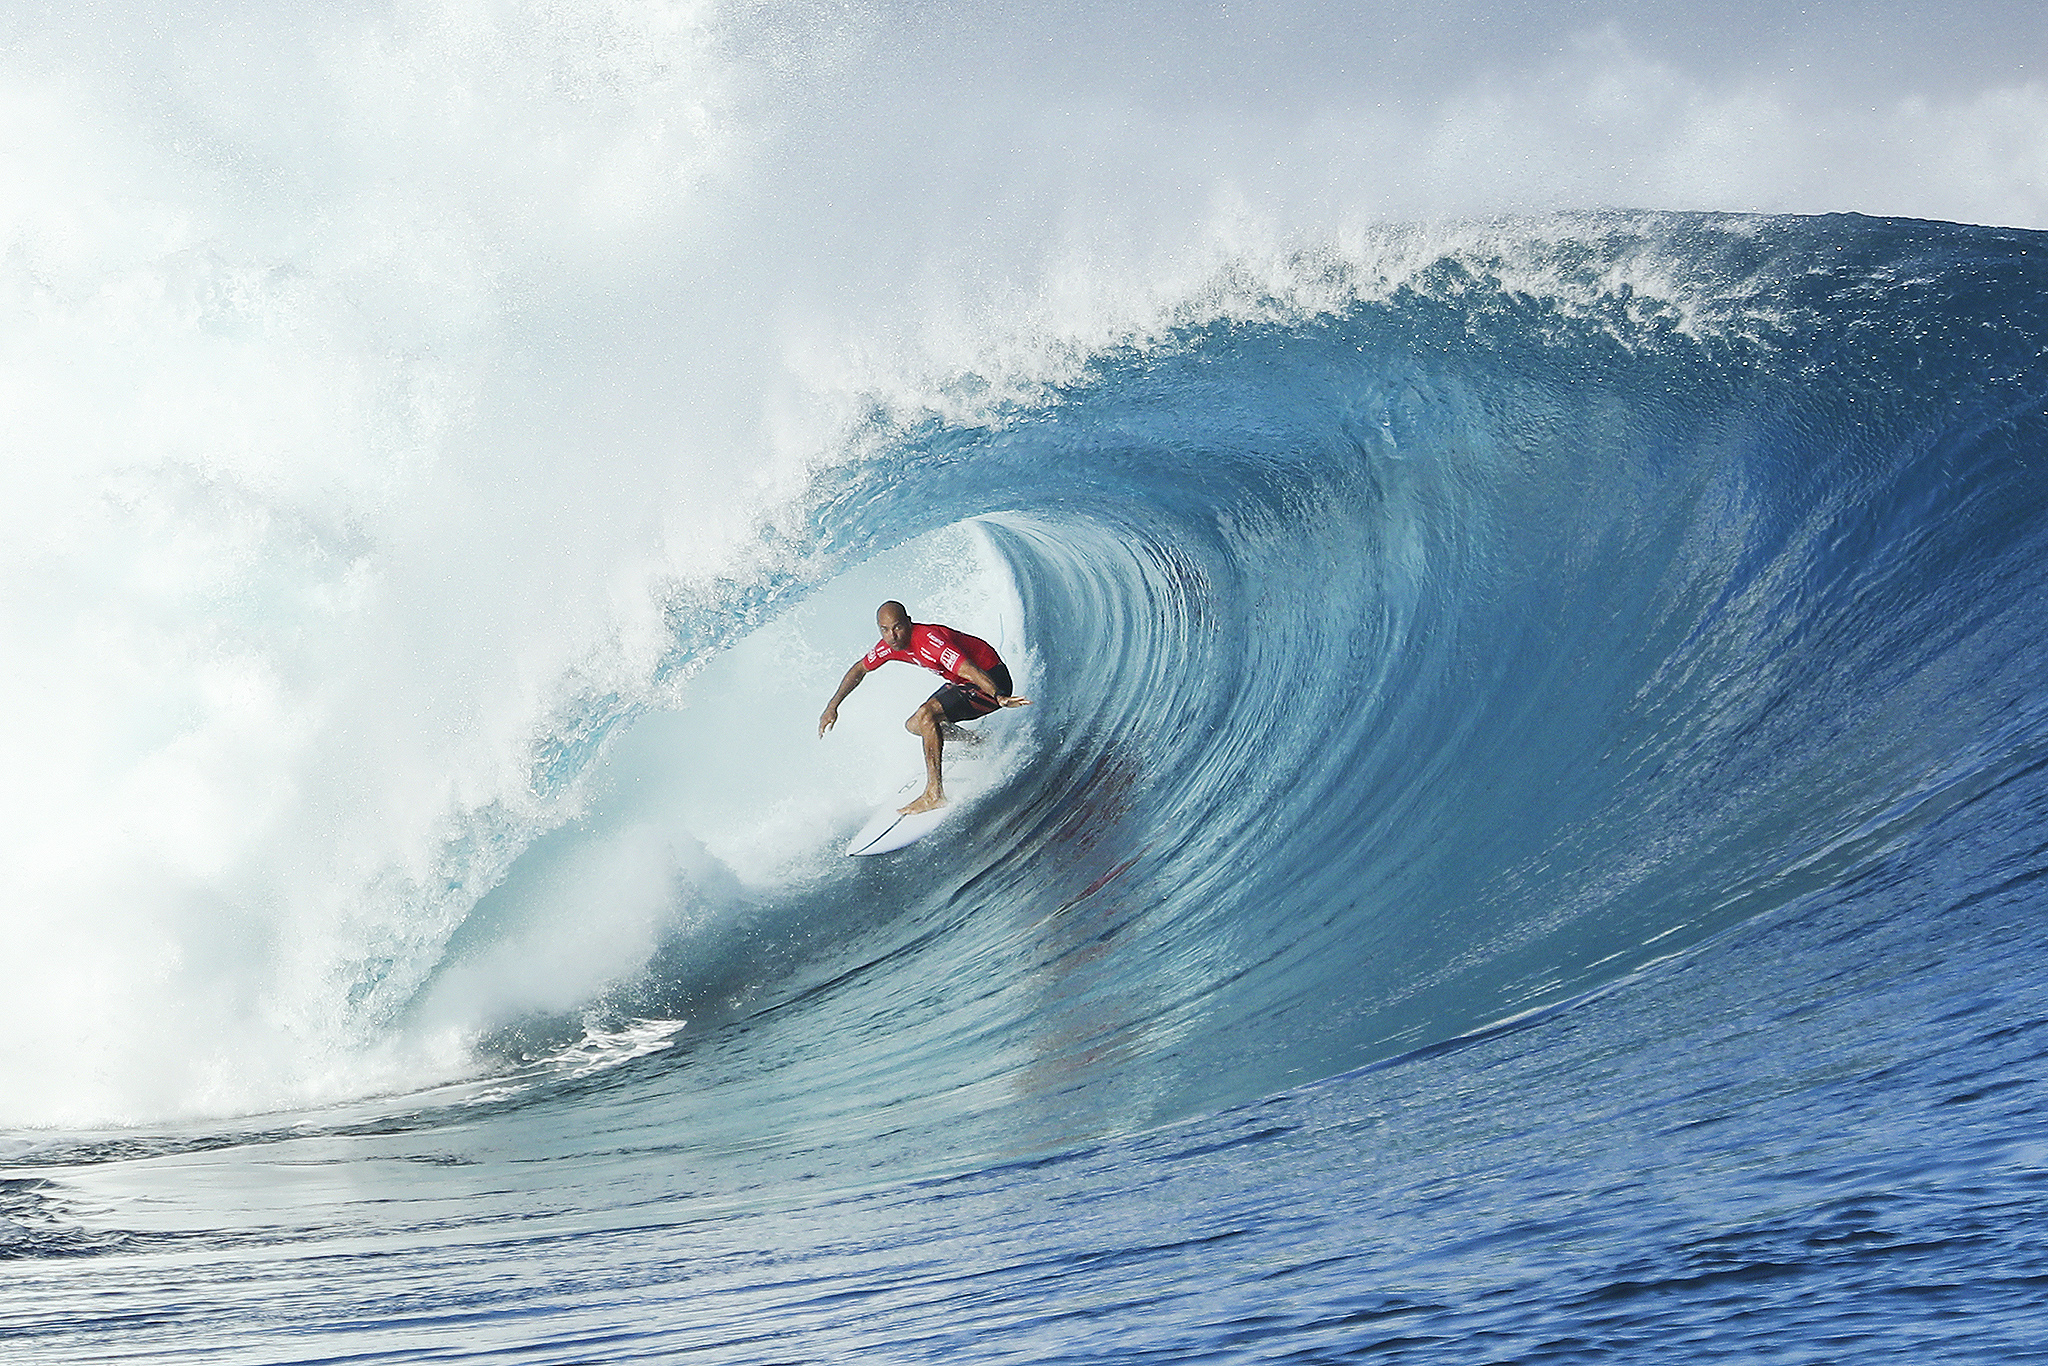 Kelly Slater of the USA (pictured) winning his Round Four heat with a Perfect 10-point ride at the Fiji Pro at Cloudbreak on Thursday June 16, 2016. PHOTO: © WSL/ Cestari SOCIAL: @Cestari This image is the copyright of the World Surf League and is provided royalty free for editorial use only, in aall media now known or hereafter created. No commercial rights granted. Sale or license of the images is prohibited. This image is a factually accurate rendering of what it depicts and has not been modified or augmented except for standard cropping and toning. ALL RIGHTS RESERVED.